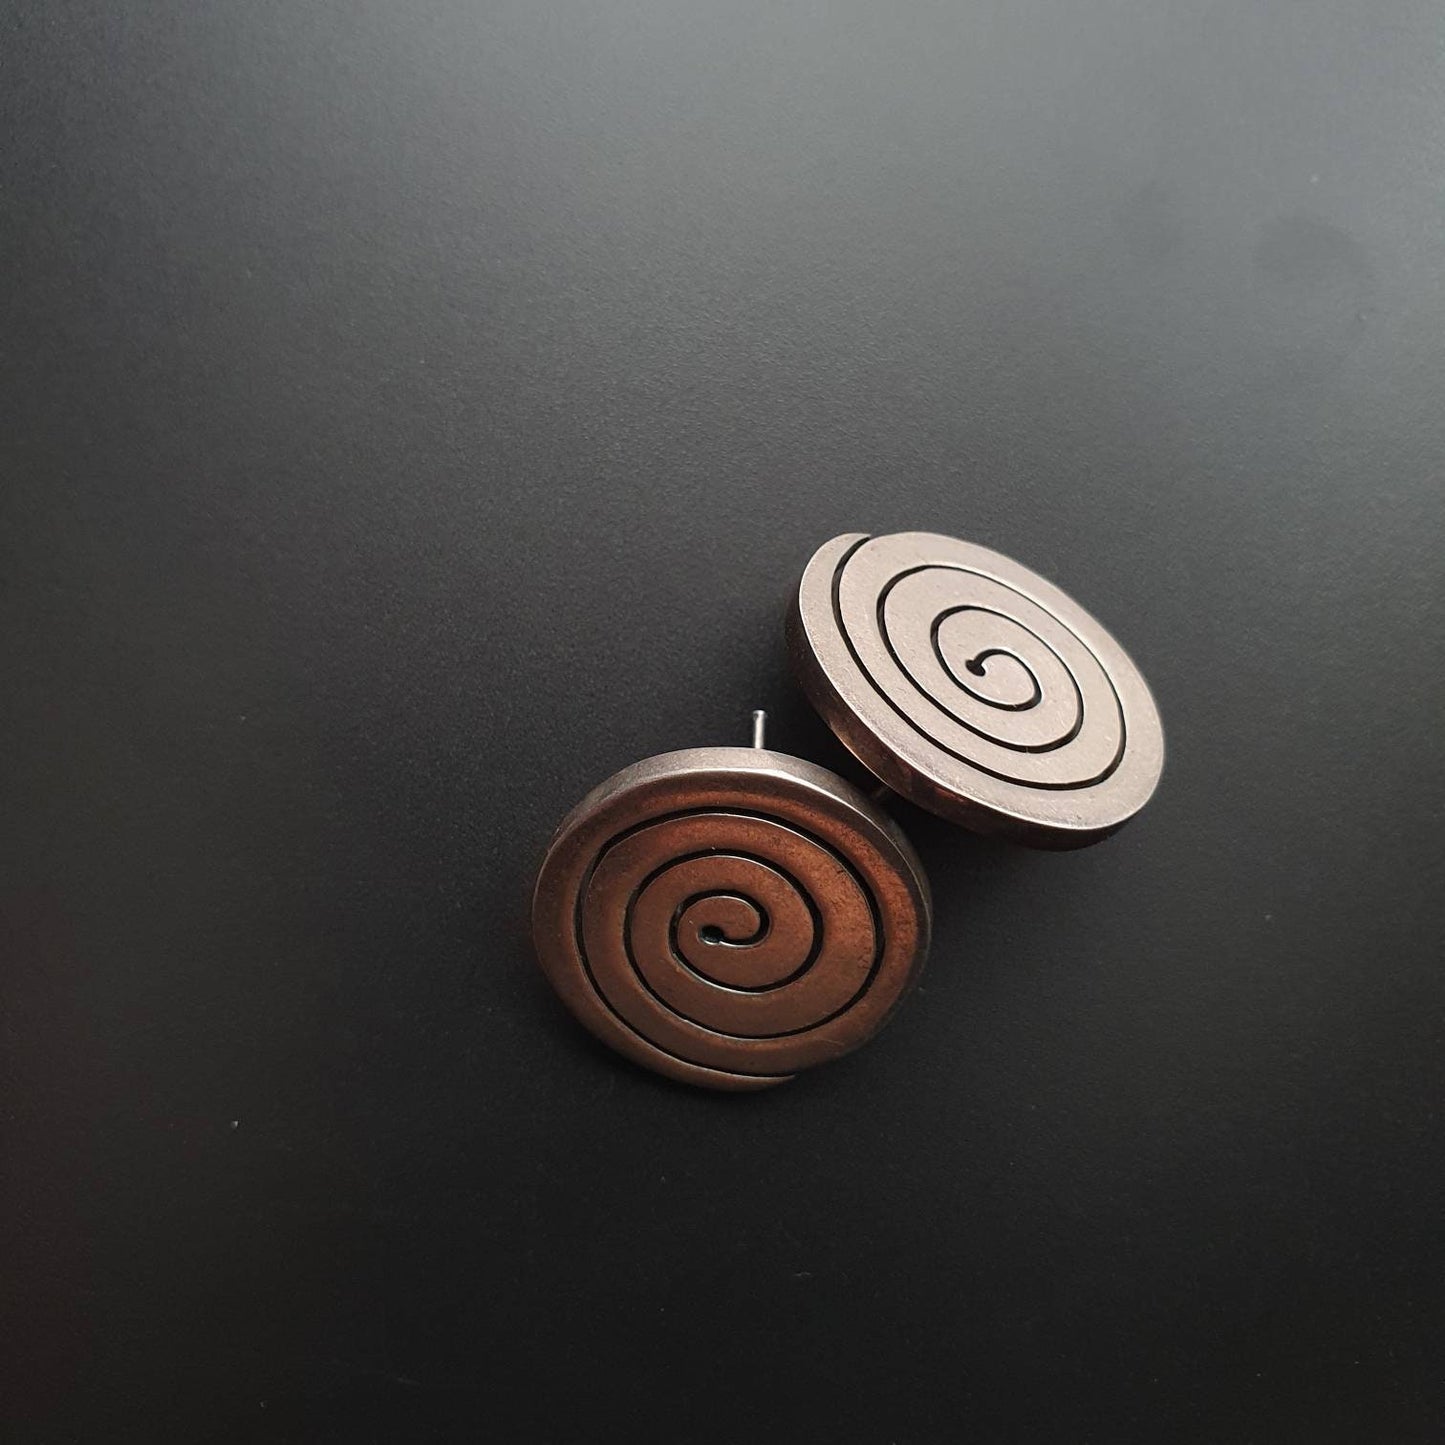 Silver Earrings, Sterling Silver Statement Earrings, Spiral Earrings, Studs Statement, Modernist Abstract Circle Round Jewellery, Street way